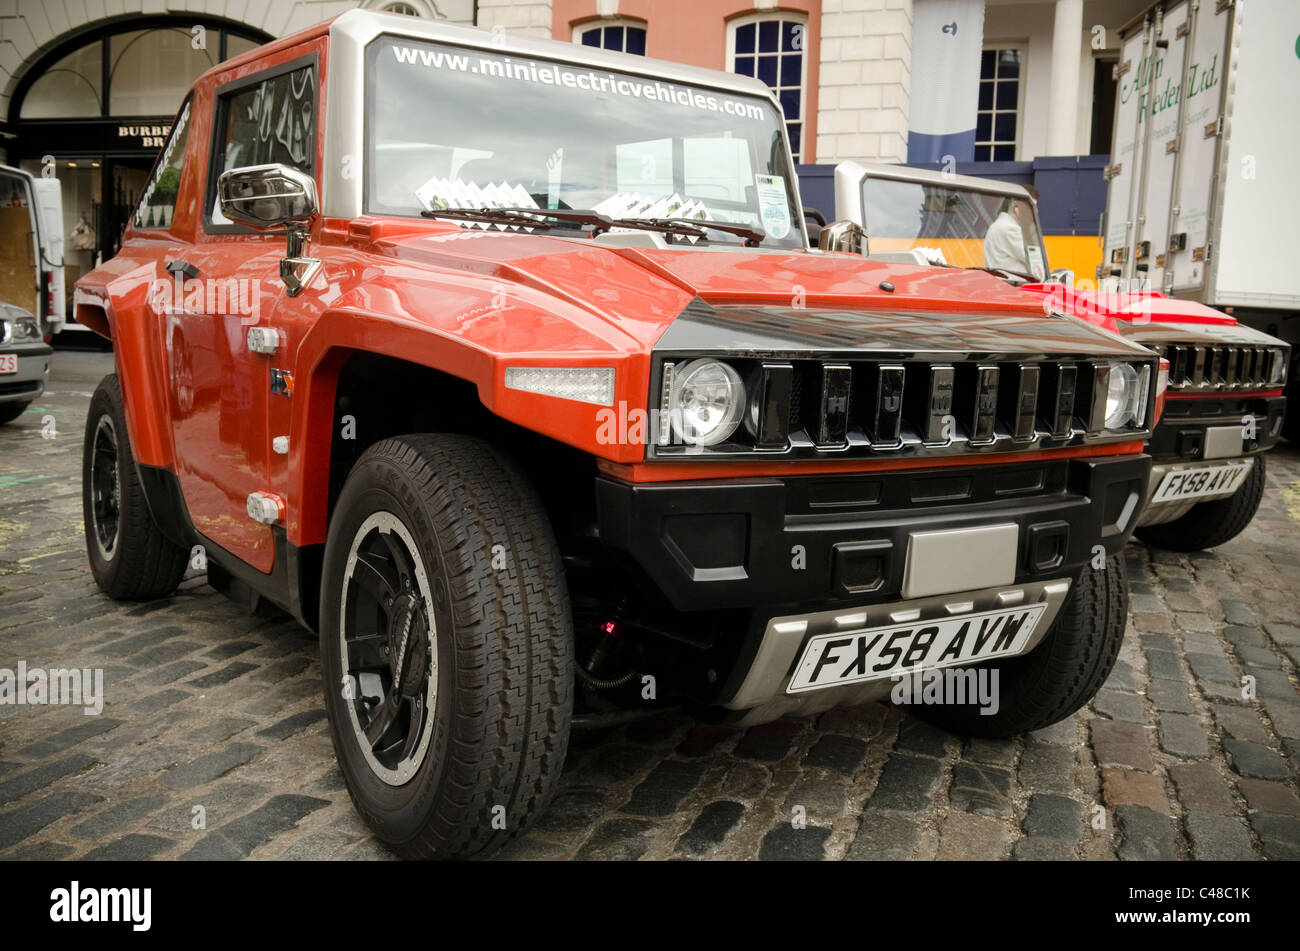 MEV HUMMER HX™ a road legal electric vehicle parked at Covent Garden Piazza London UK Stock Photo